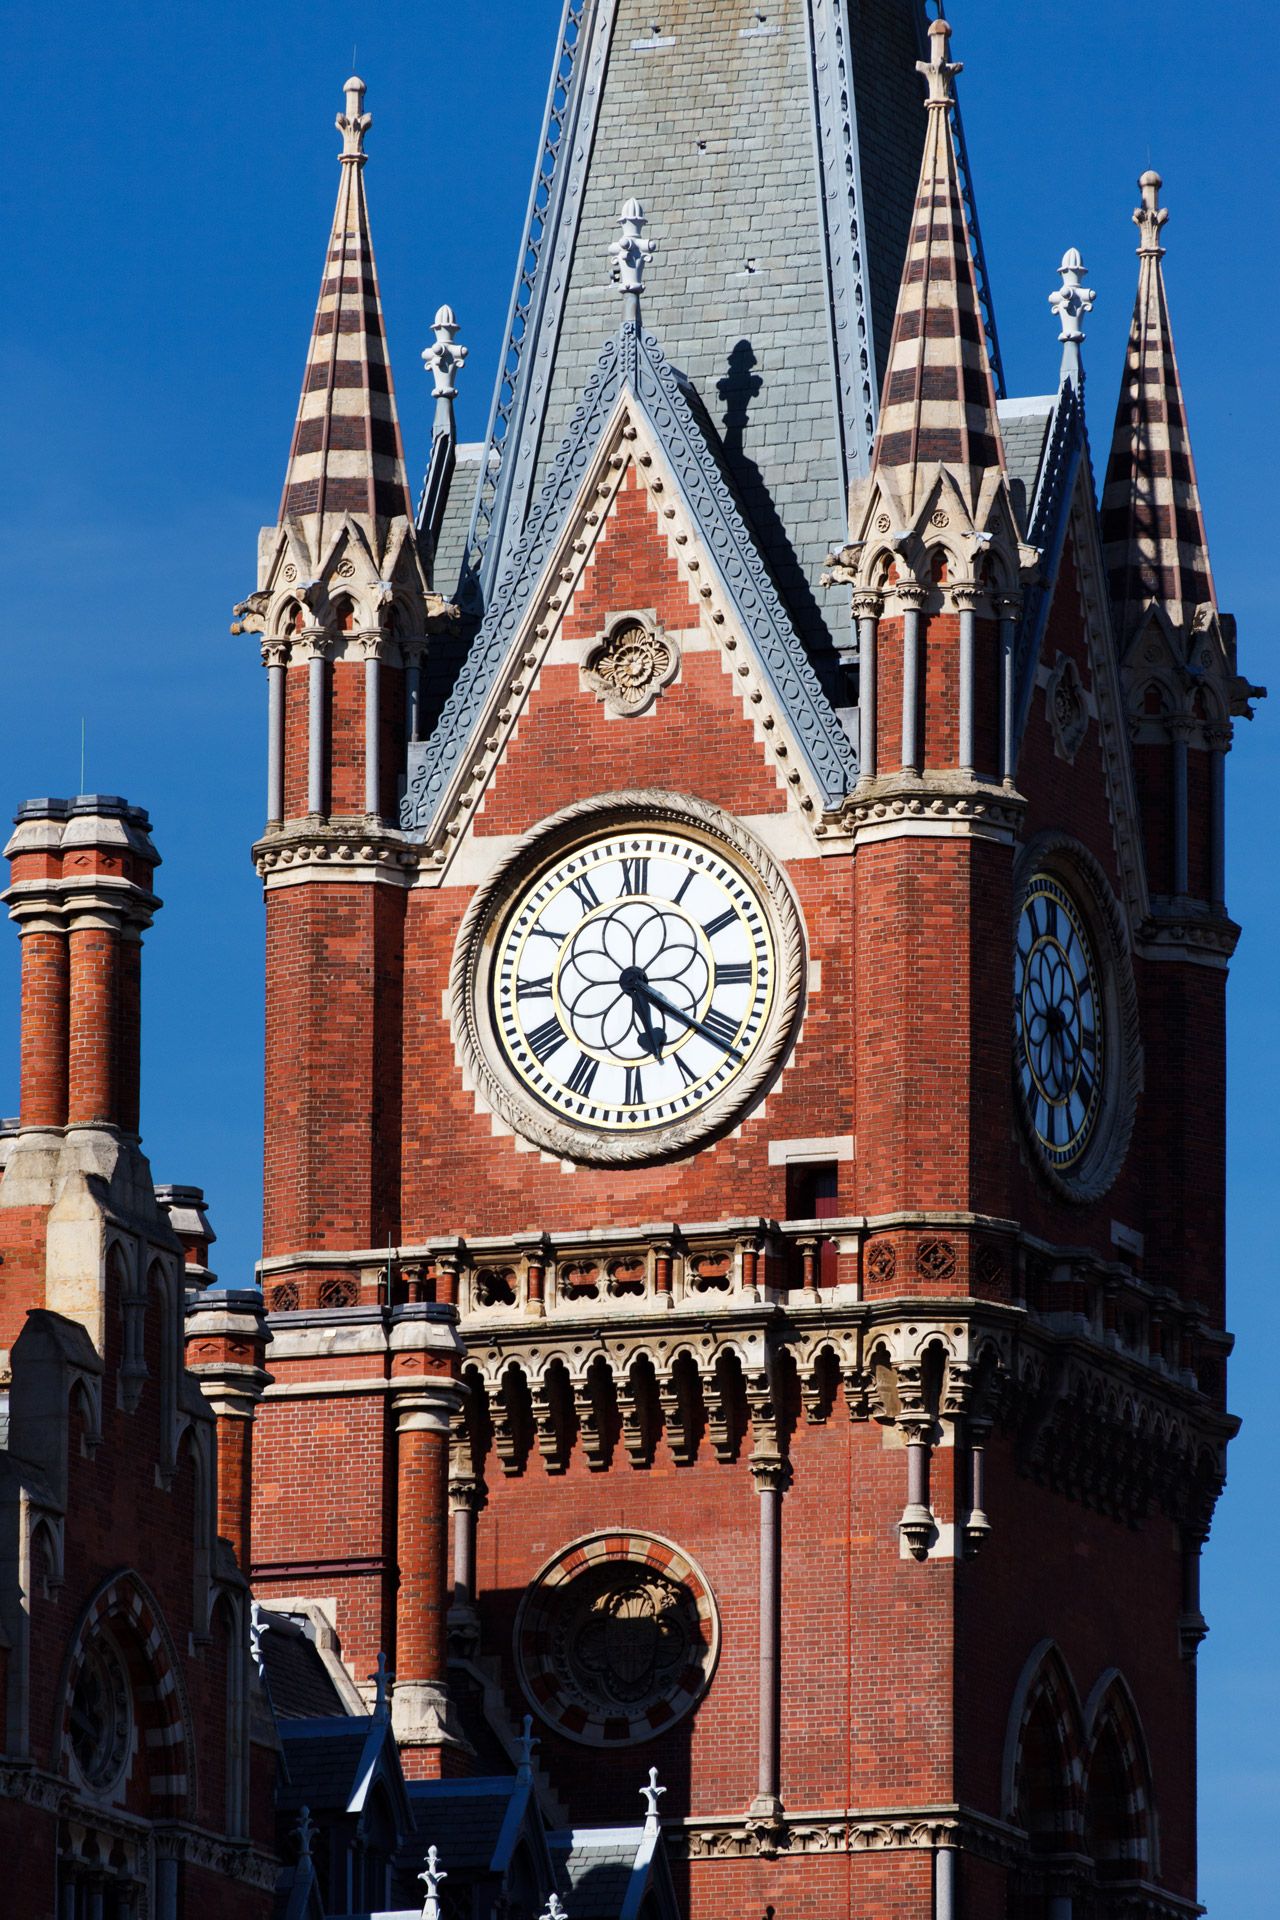 clock towers london images download full free high resolution | HD ...